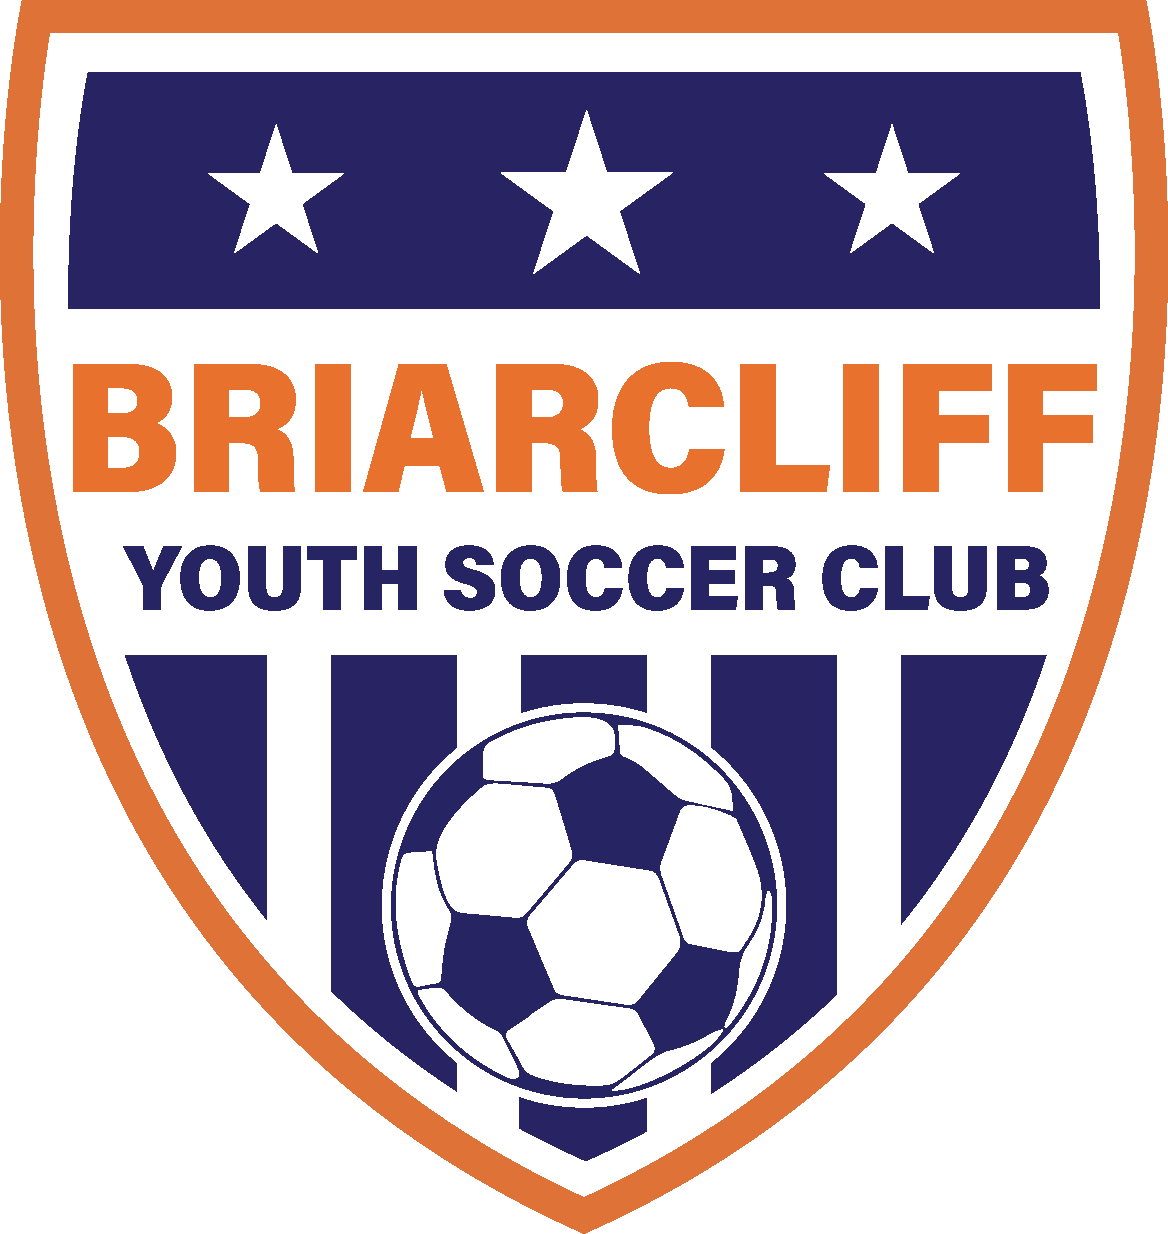 Briarcliff Youth Soccer Club